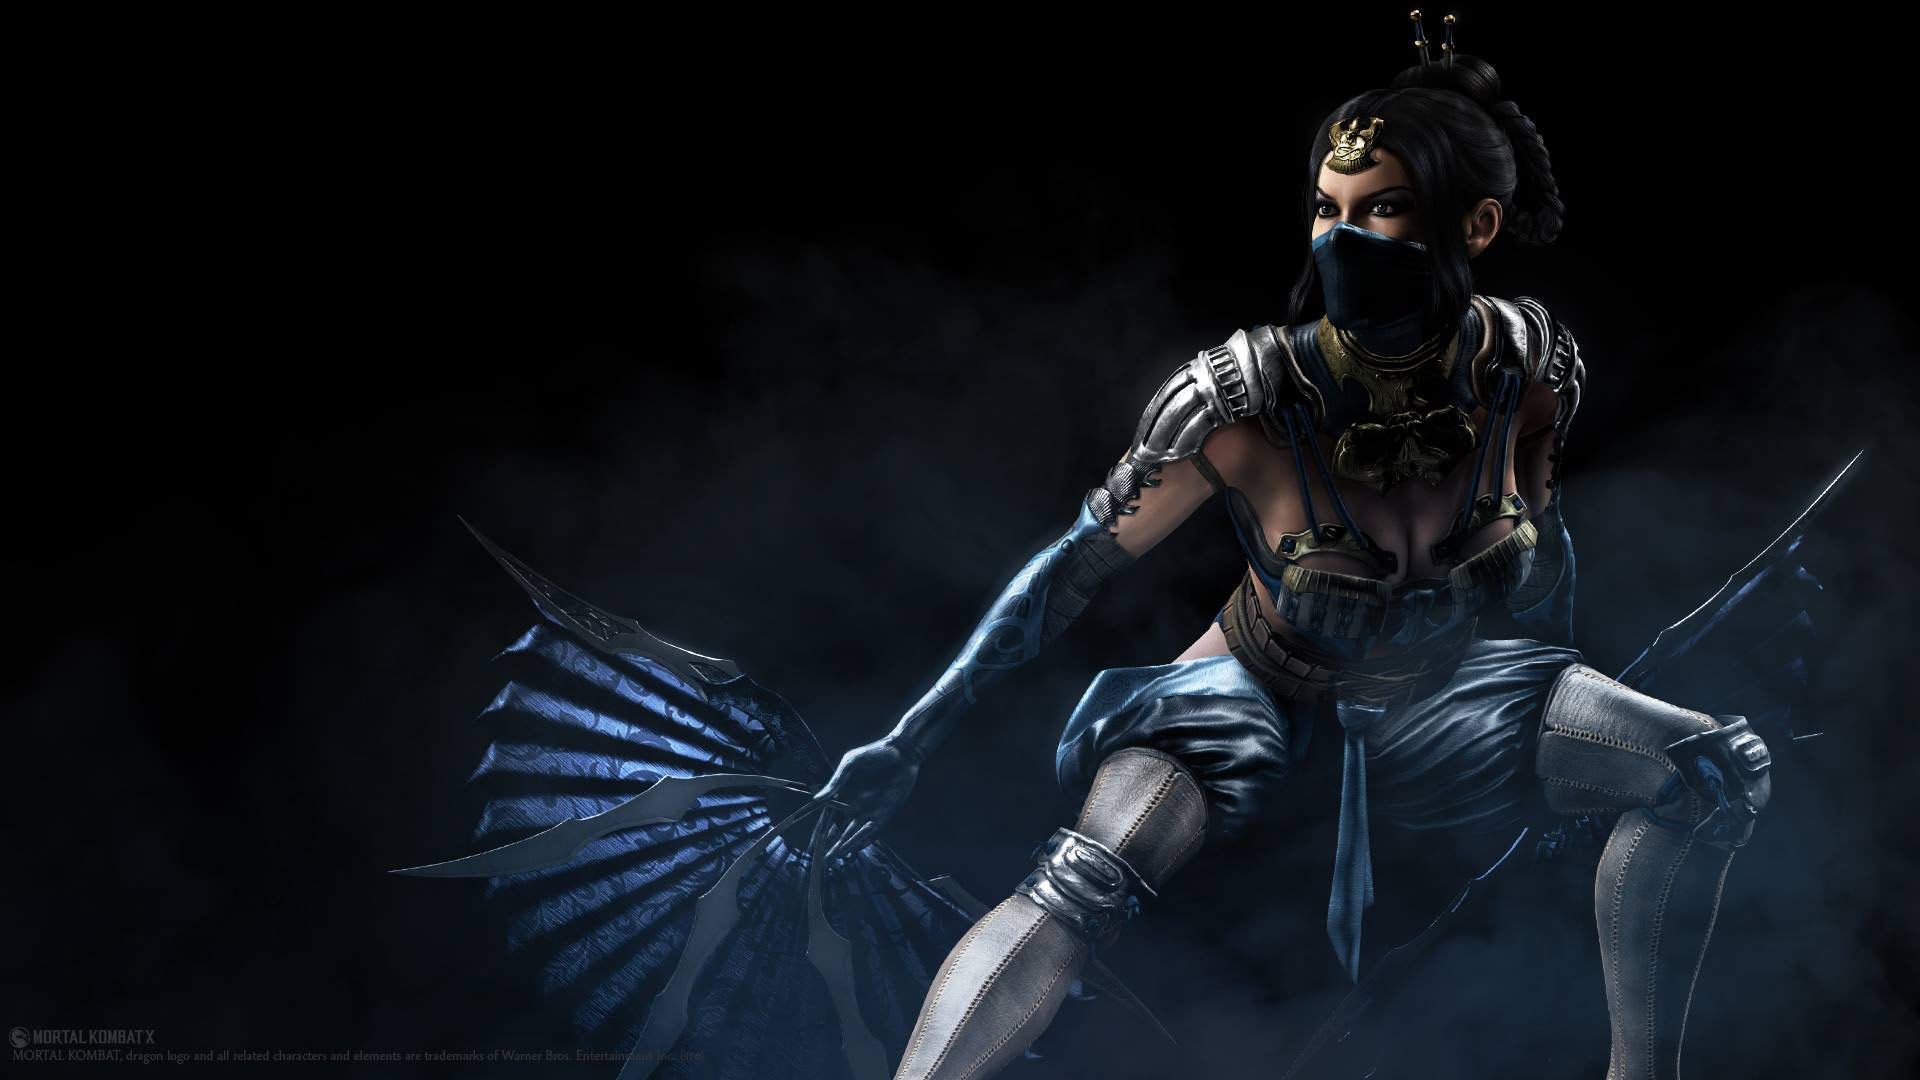 Mortal Kombat X HD Wallpapers and Backgrounds